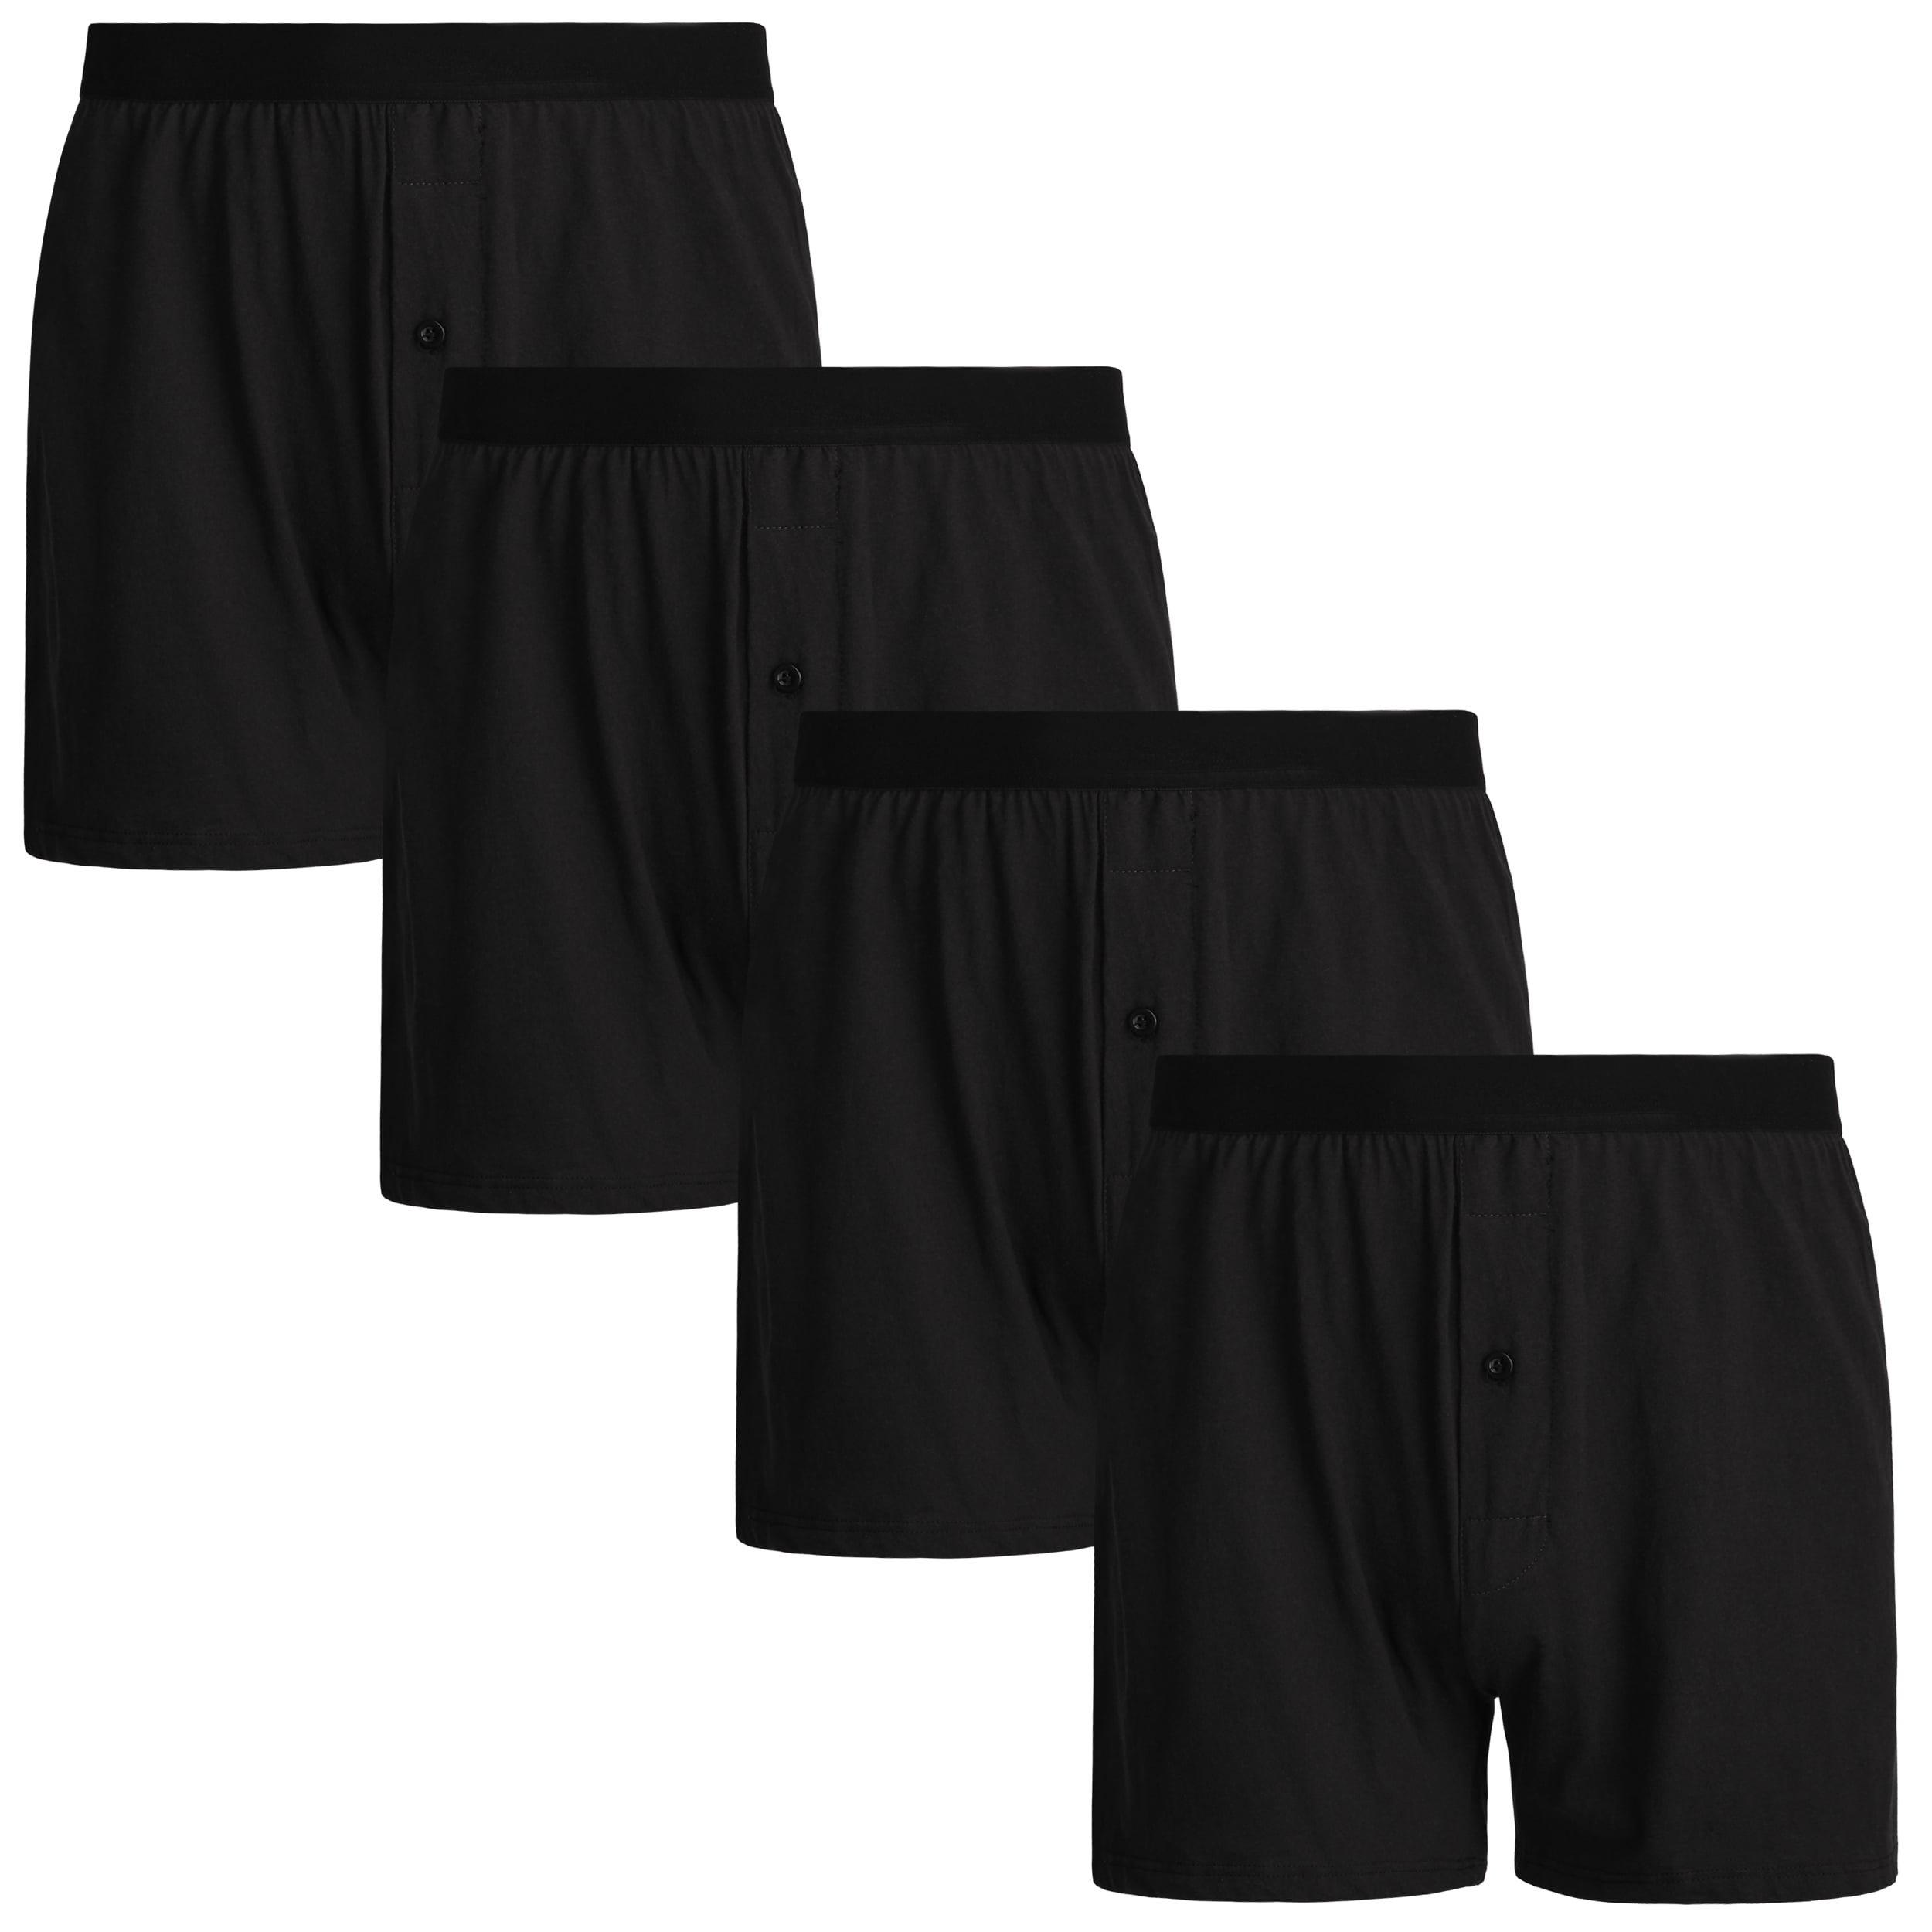 INNERSY Men's Boxers Cotton Knit Shorts Black Boxers for Men with ...